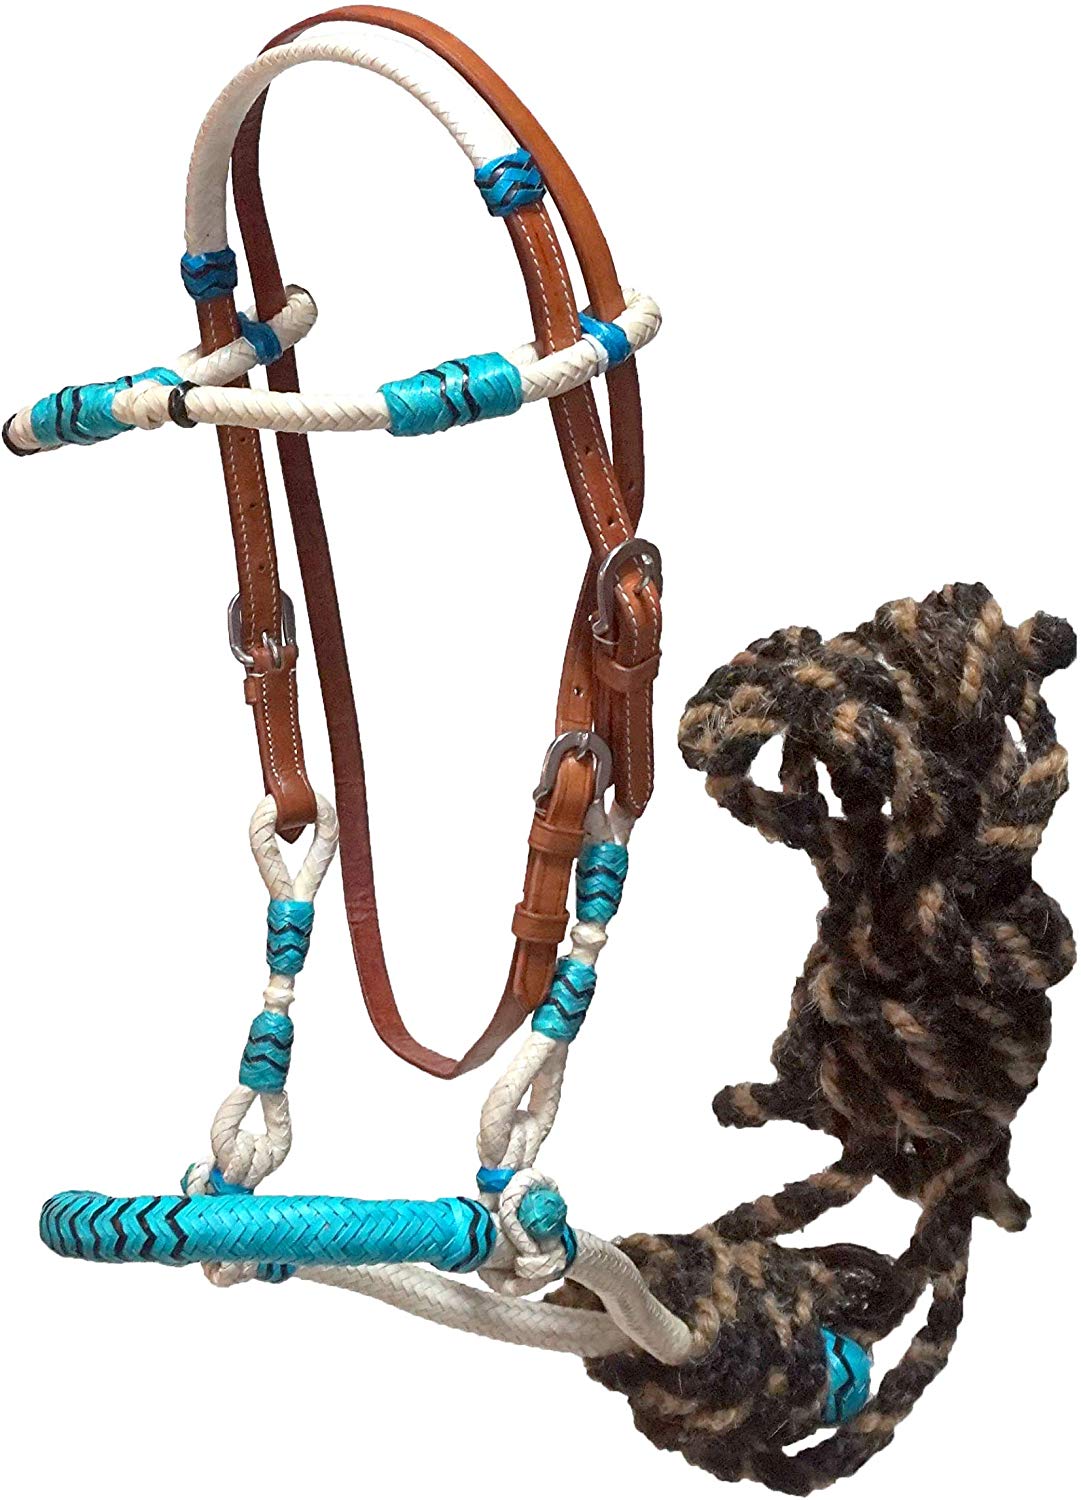 Equitem Full Horse Size Leather Headstall with Teal Rawhide Wrap Accent 